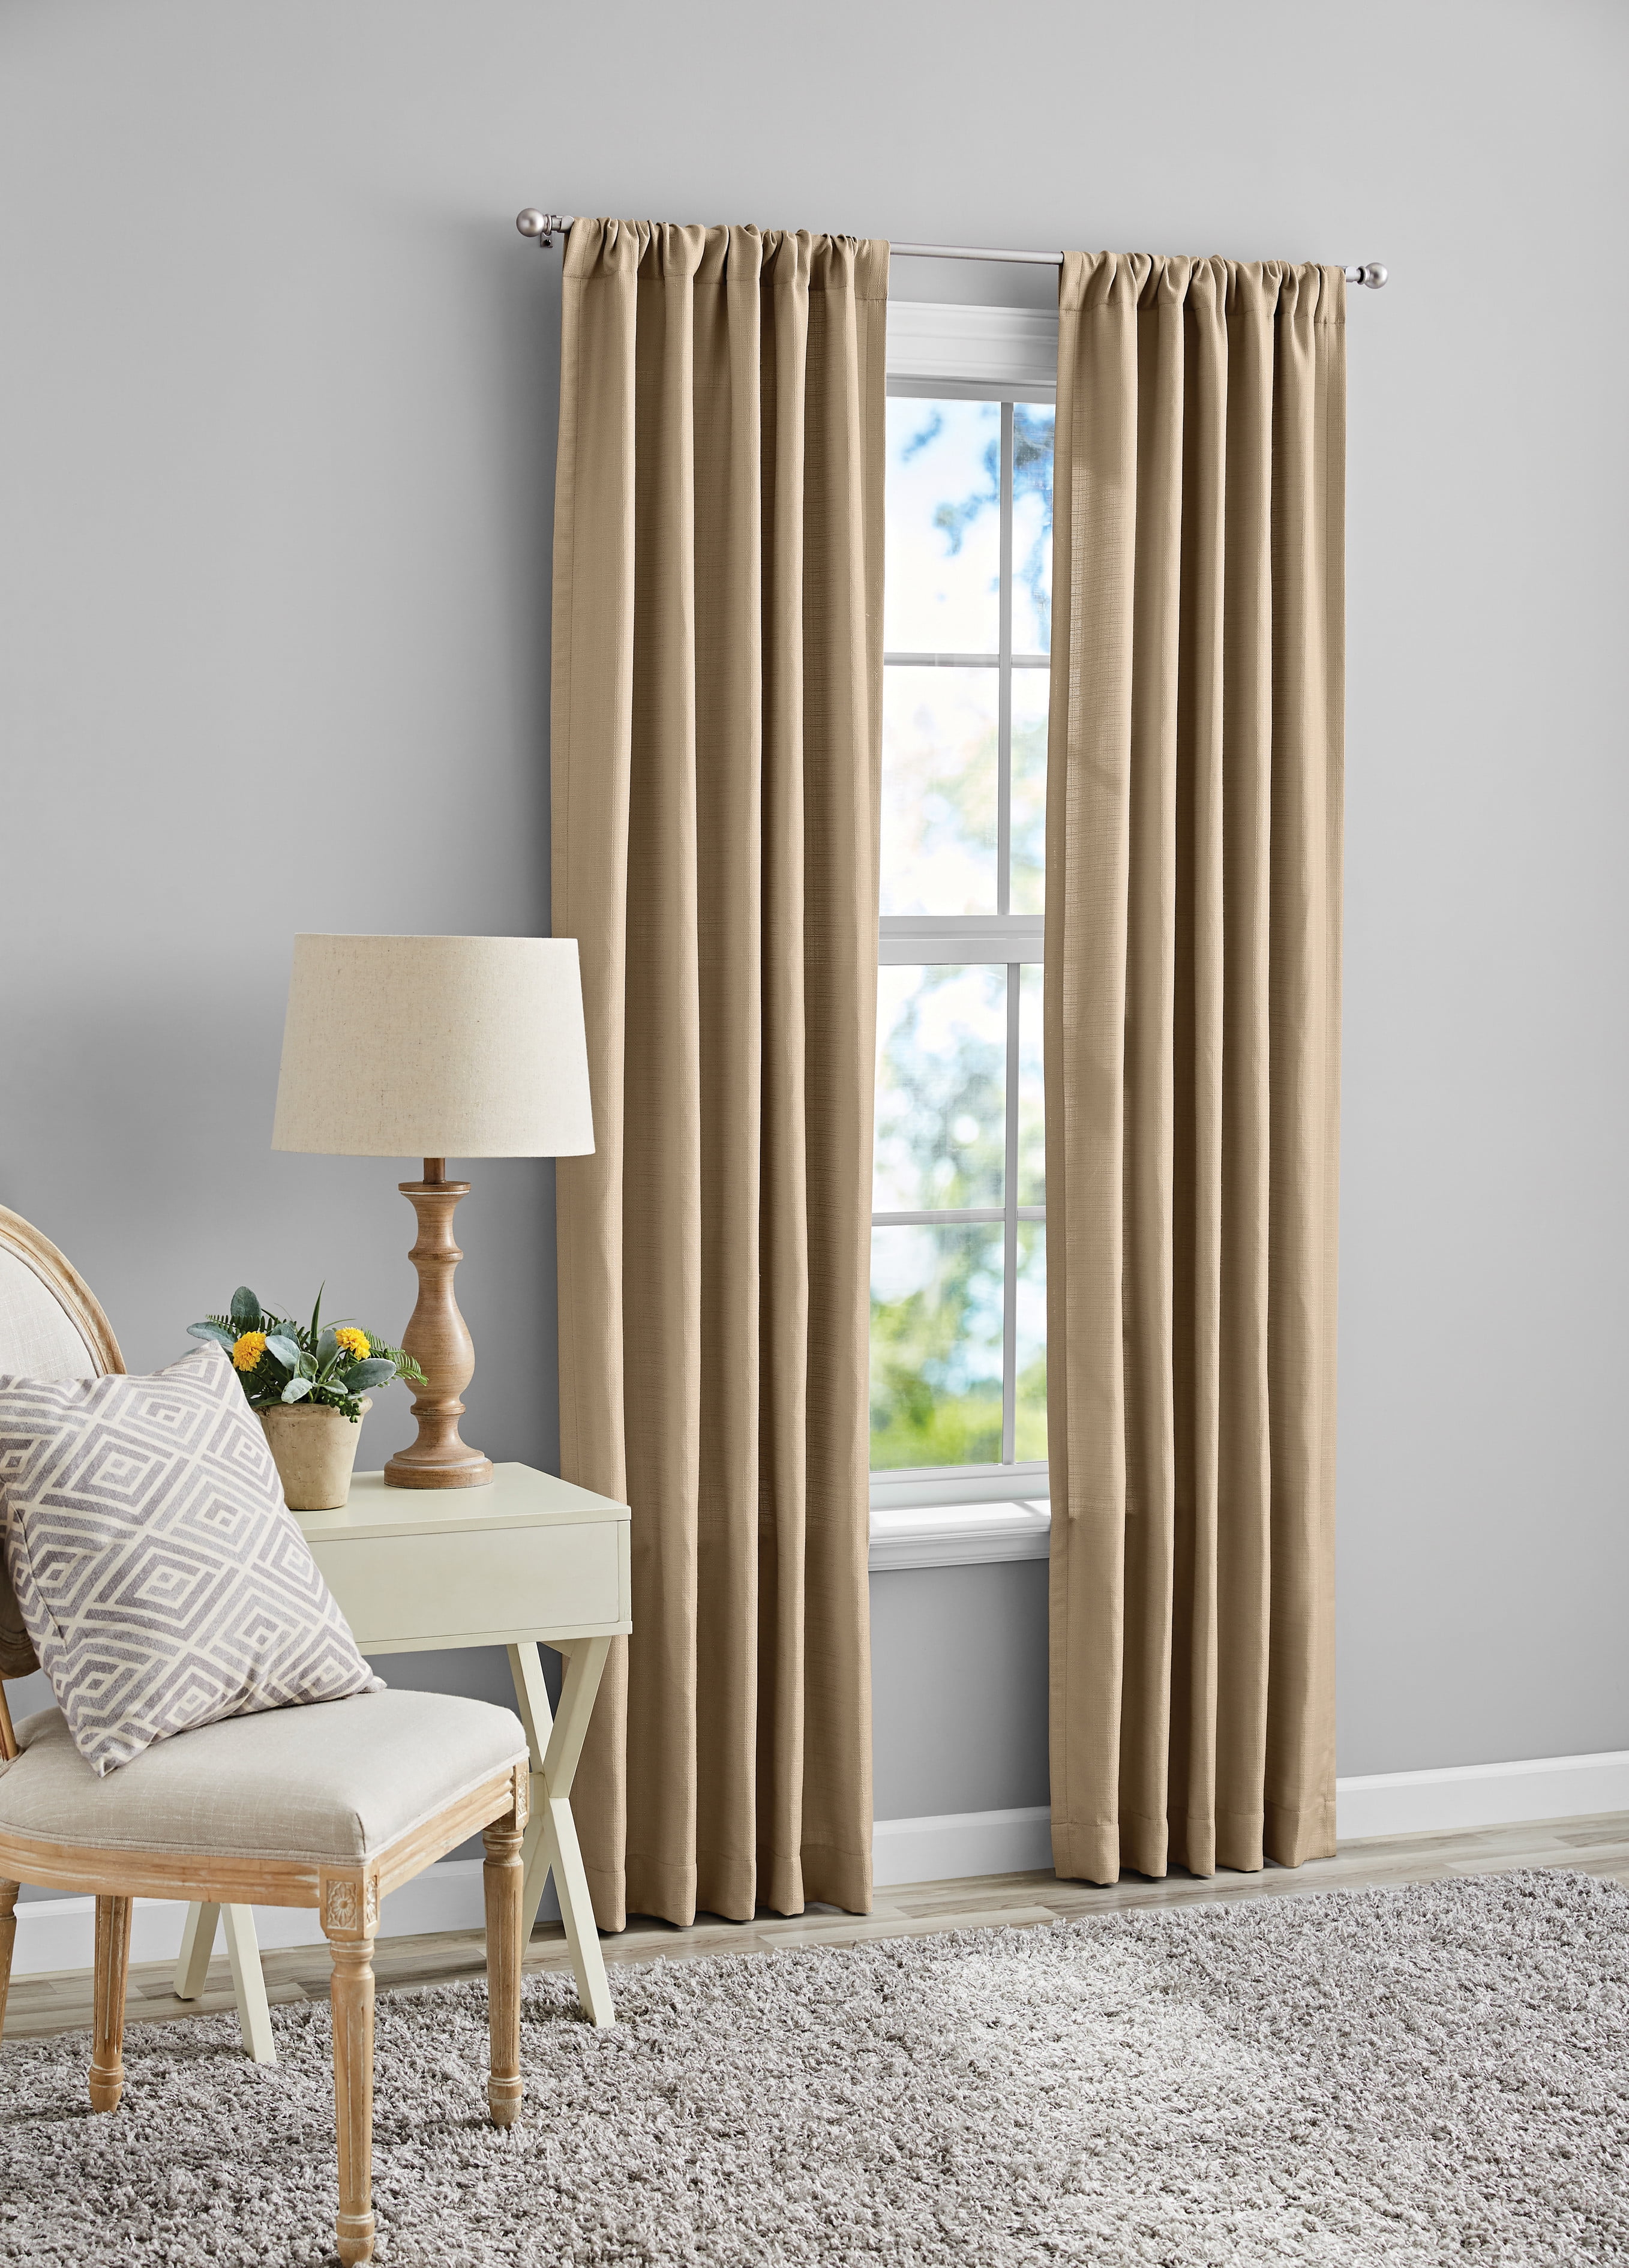 Mainstays Southport Solid Color Light Filtering Rod Pocket Curtain Panel Pair, Set of 2, Beige, 40 x 84